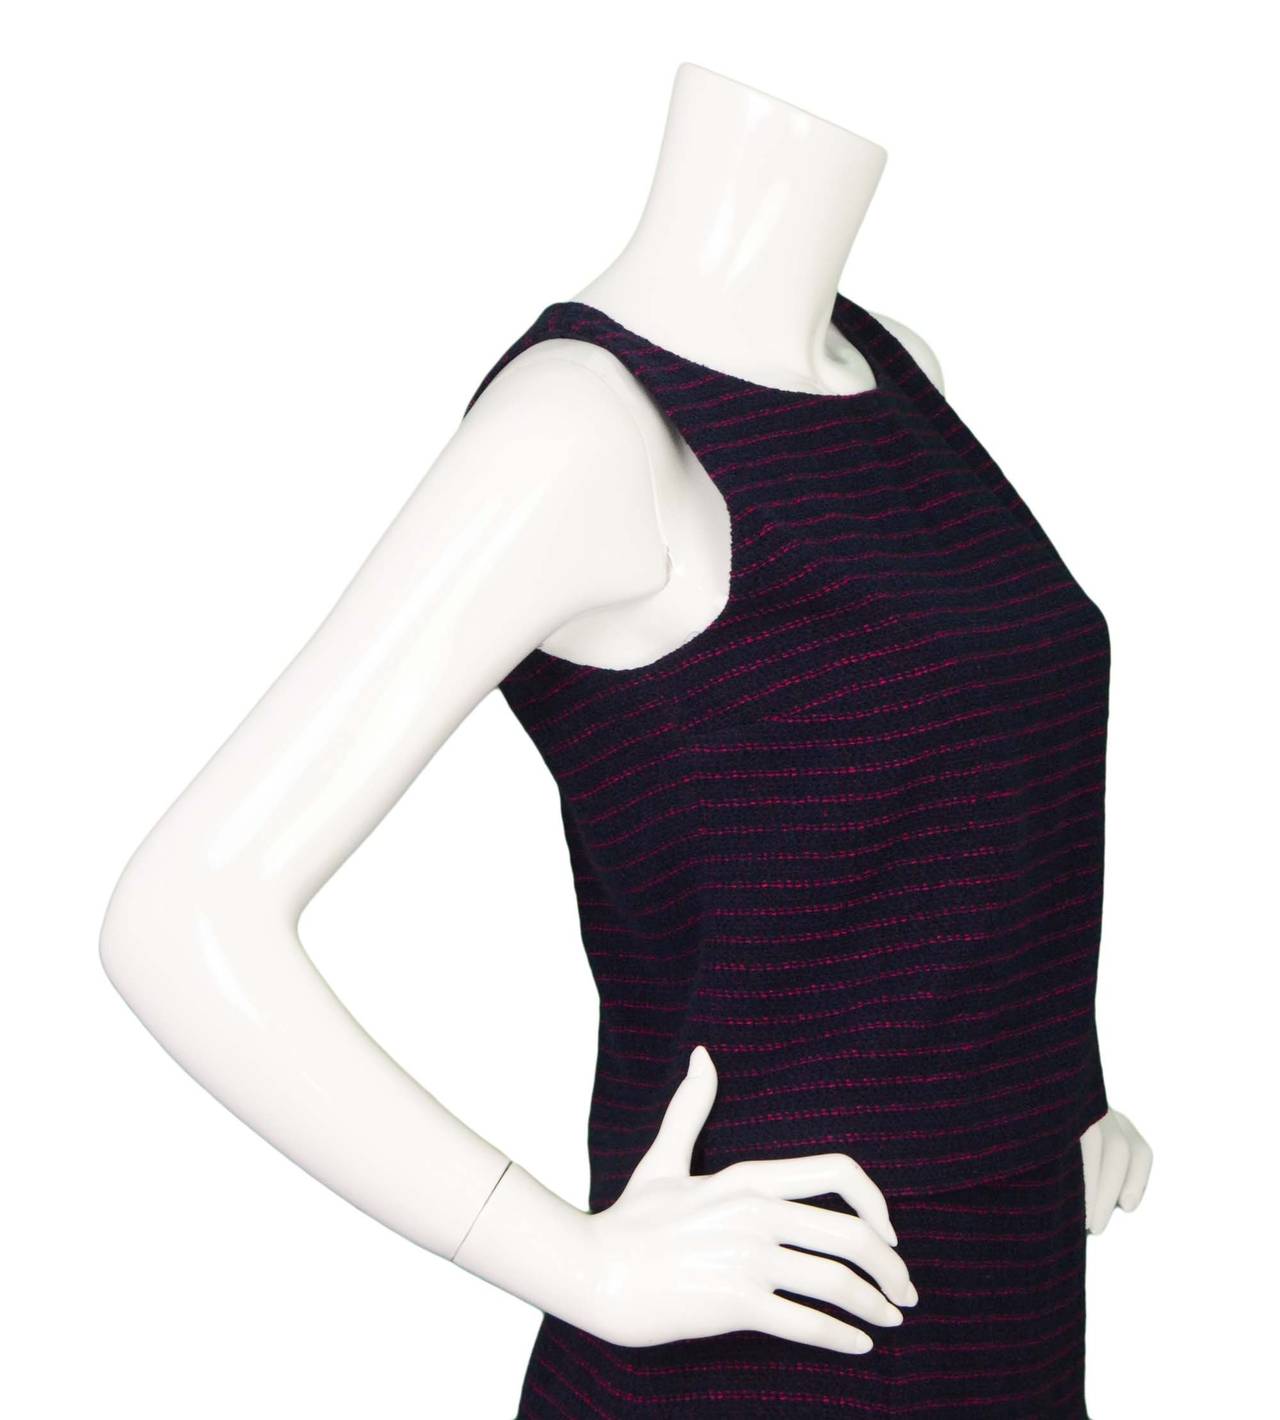 Chanel Vintage '98 Navy & Pink Striped Tweed Shell Top
Features two small slits on side for slight flare effect
Made in: France
Year of Production: 1998
Color: Navy and pink
Composition: 95% wool, 5% nylon
Lining: Navy, 95% silk, 5%